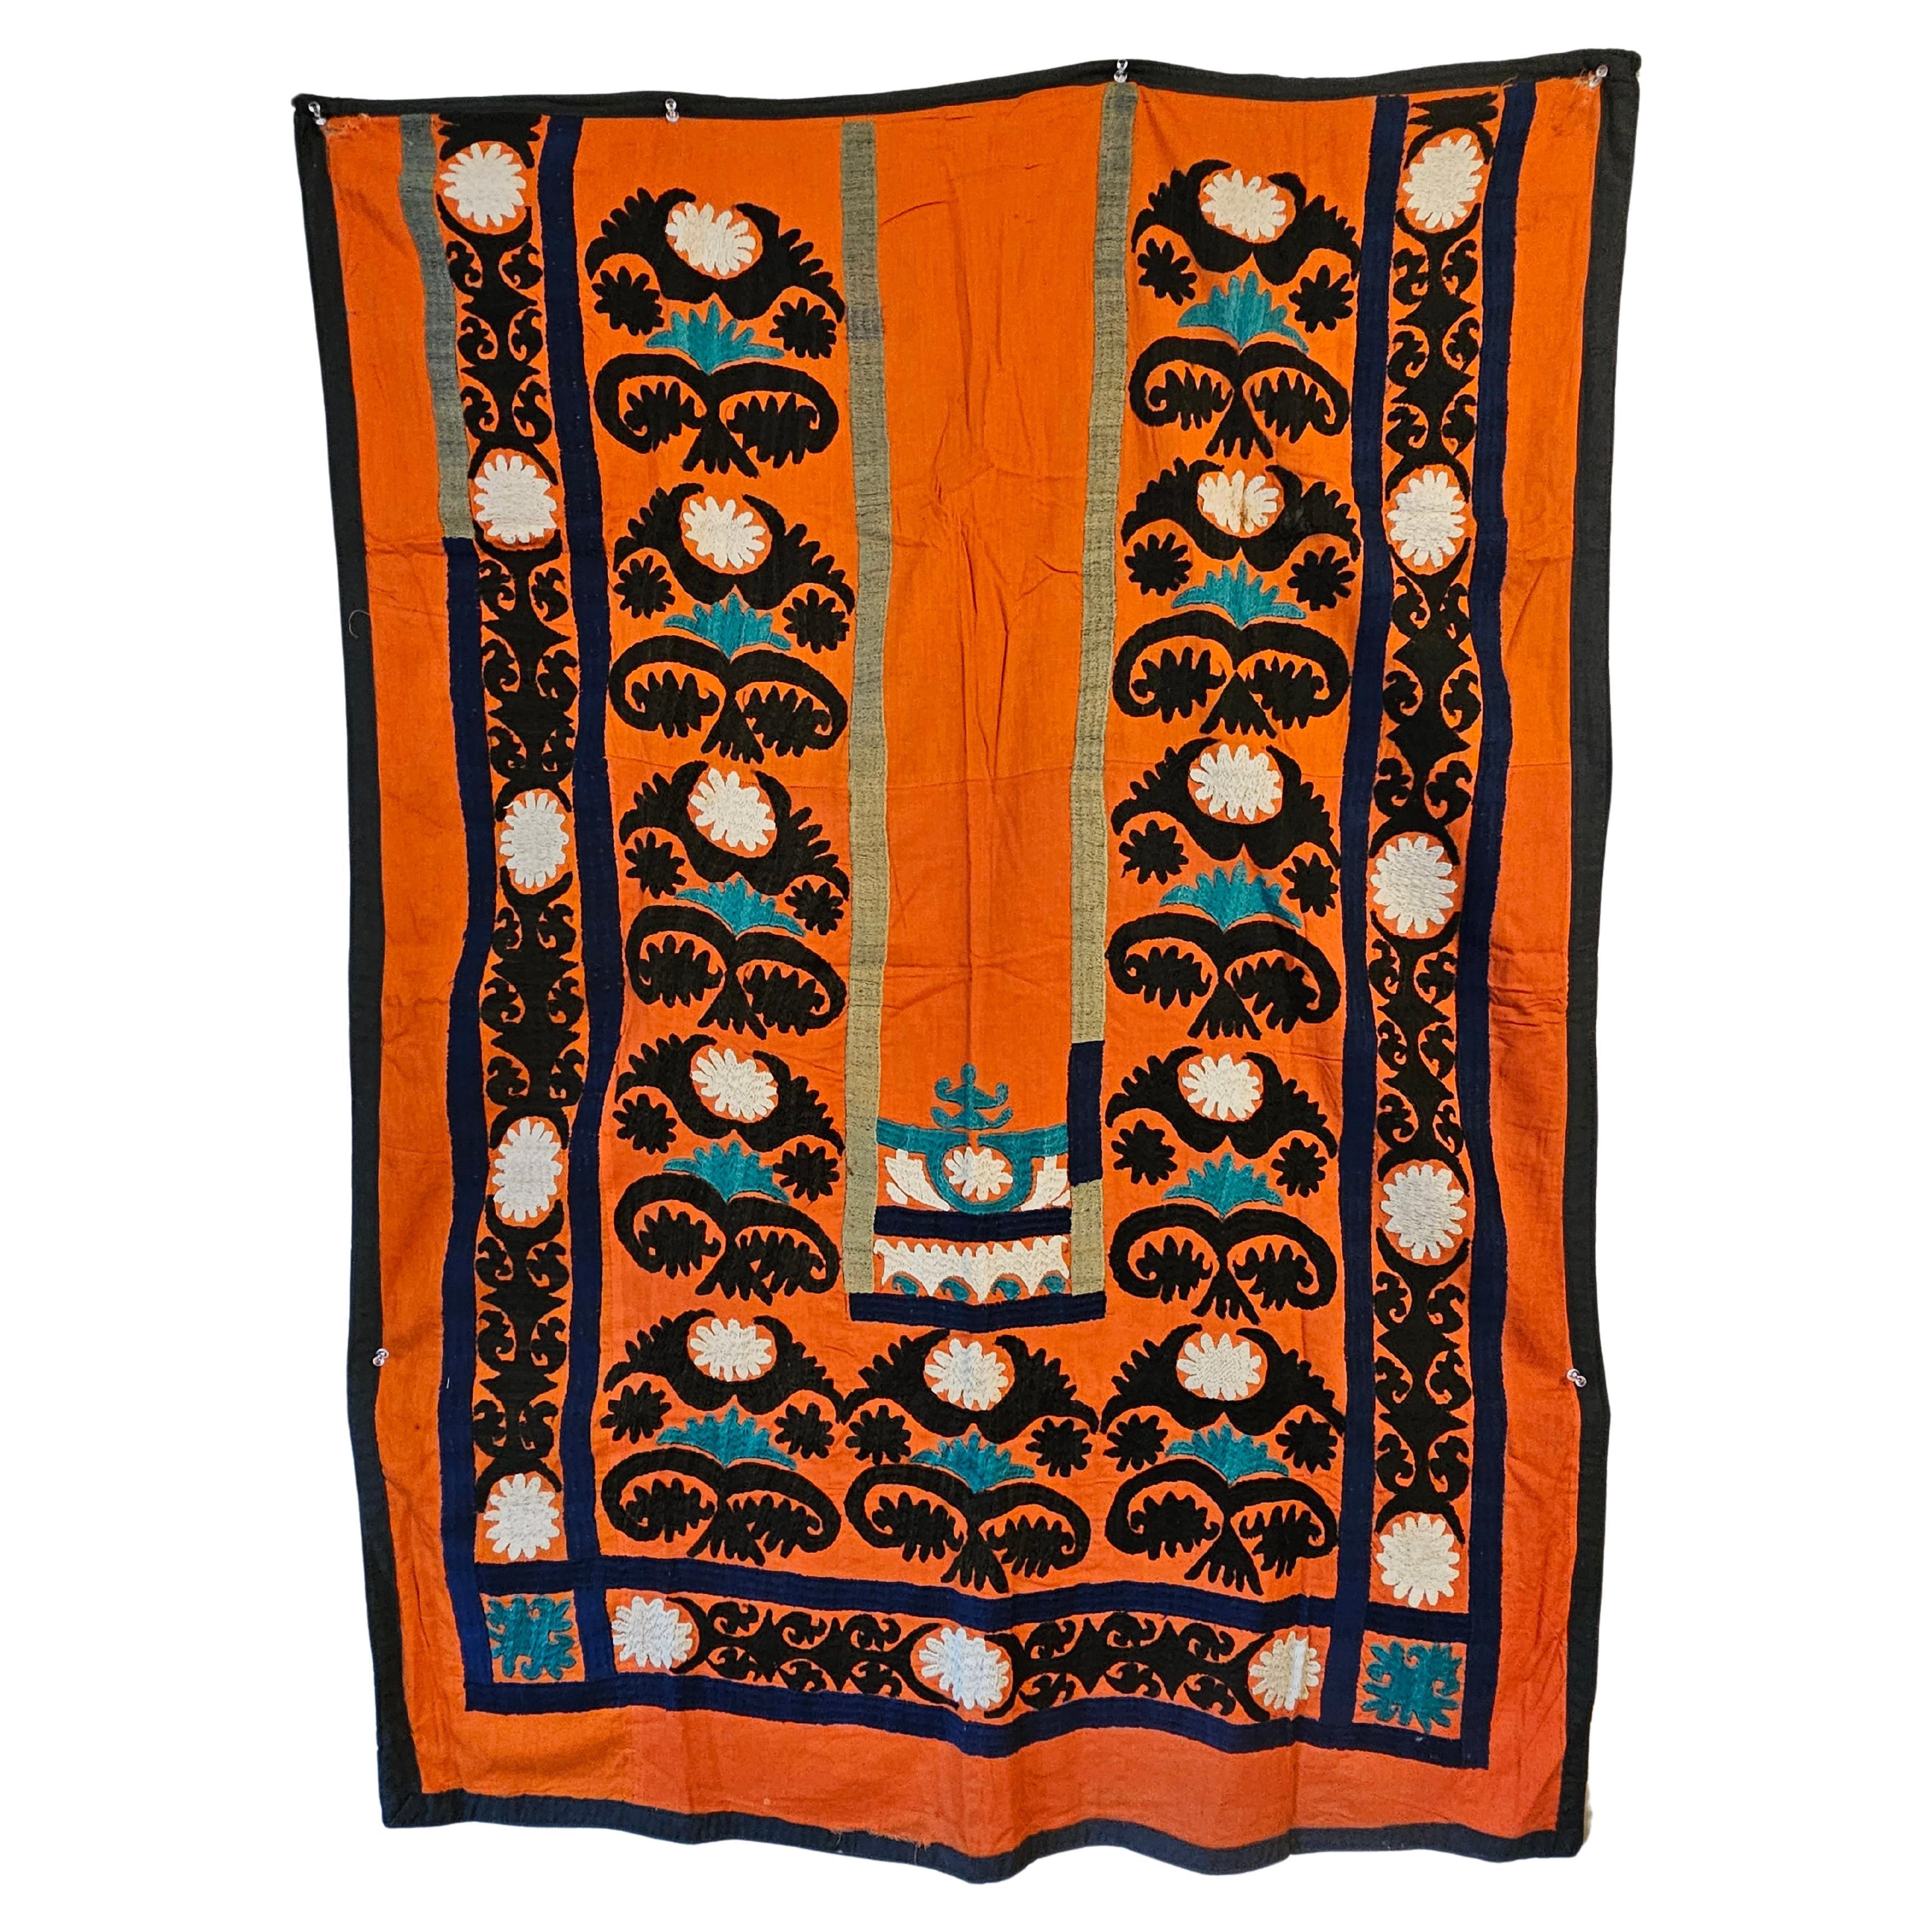 Embroidered Central Asian Rugs